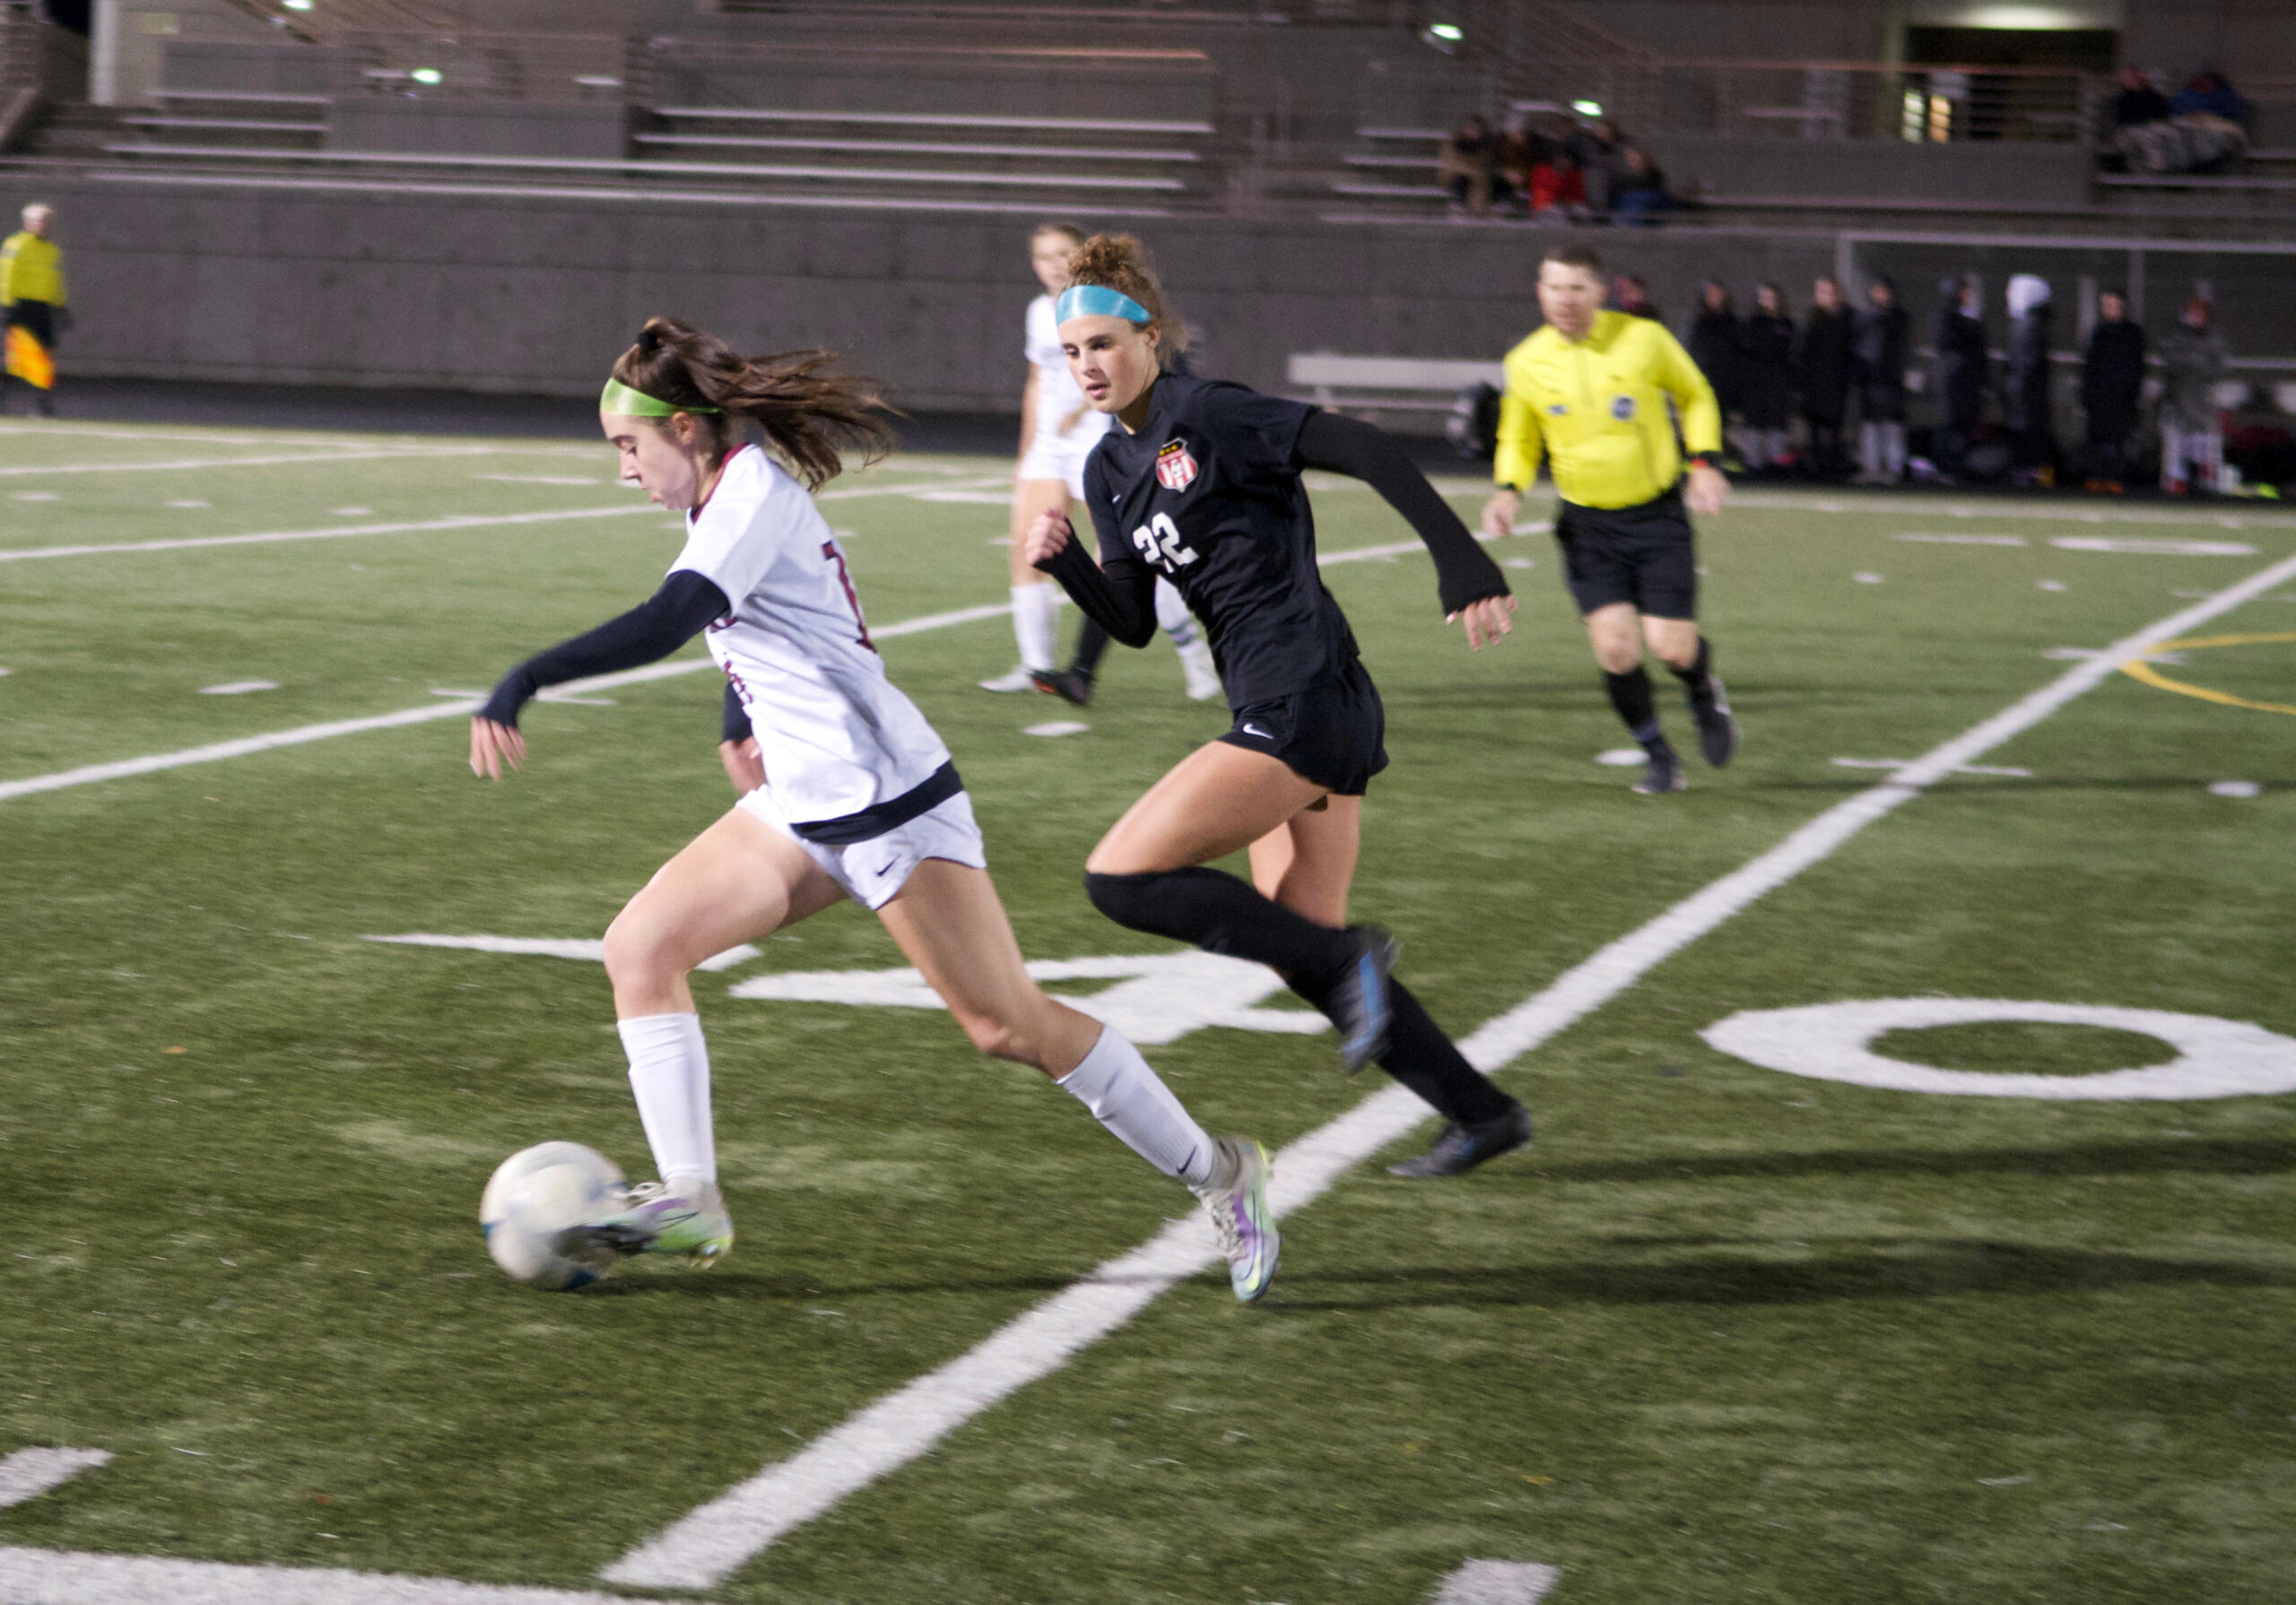 Camas forward Saige McCusker (22) chases Eastlake's Sophia Bonacci during a Class 4A first round state playoff soccer match on Tuesday, Nov. 8, 2022, at Doc Harris Stadium.